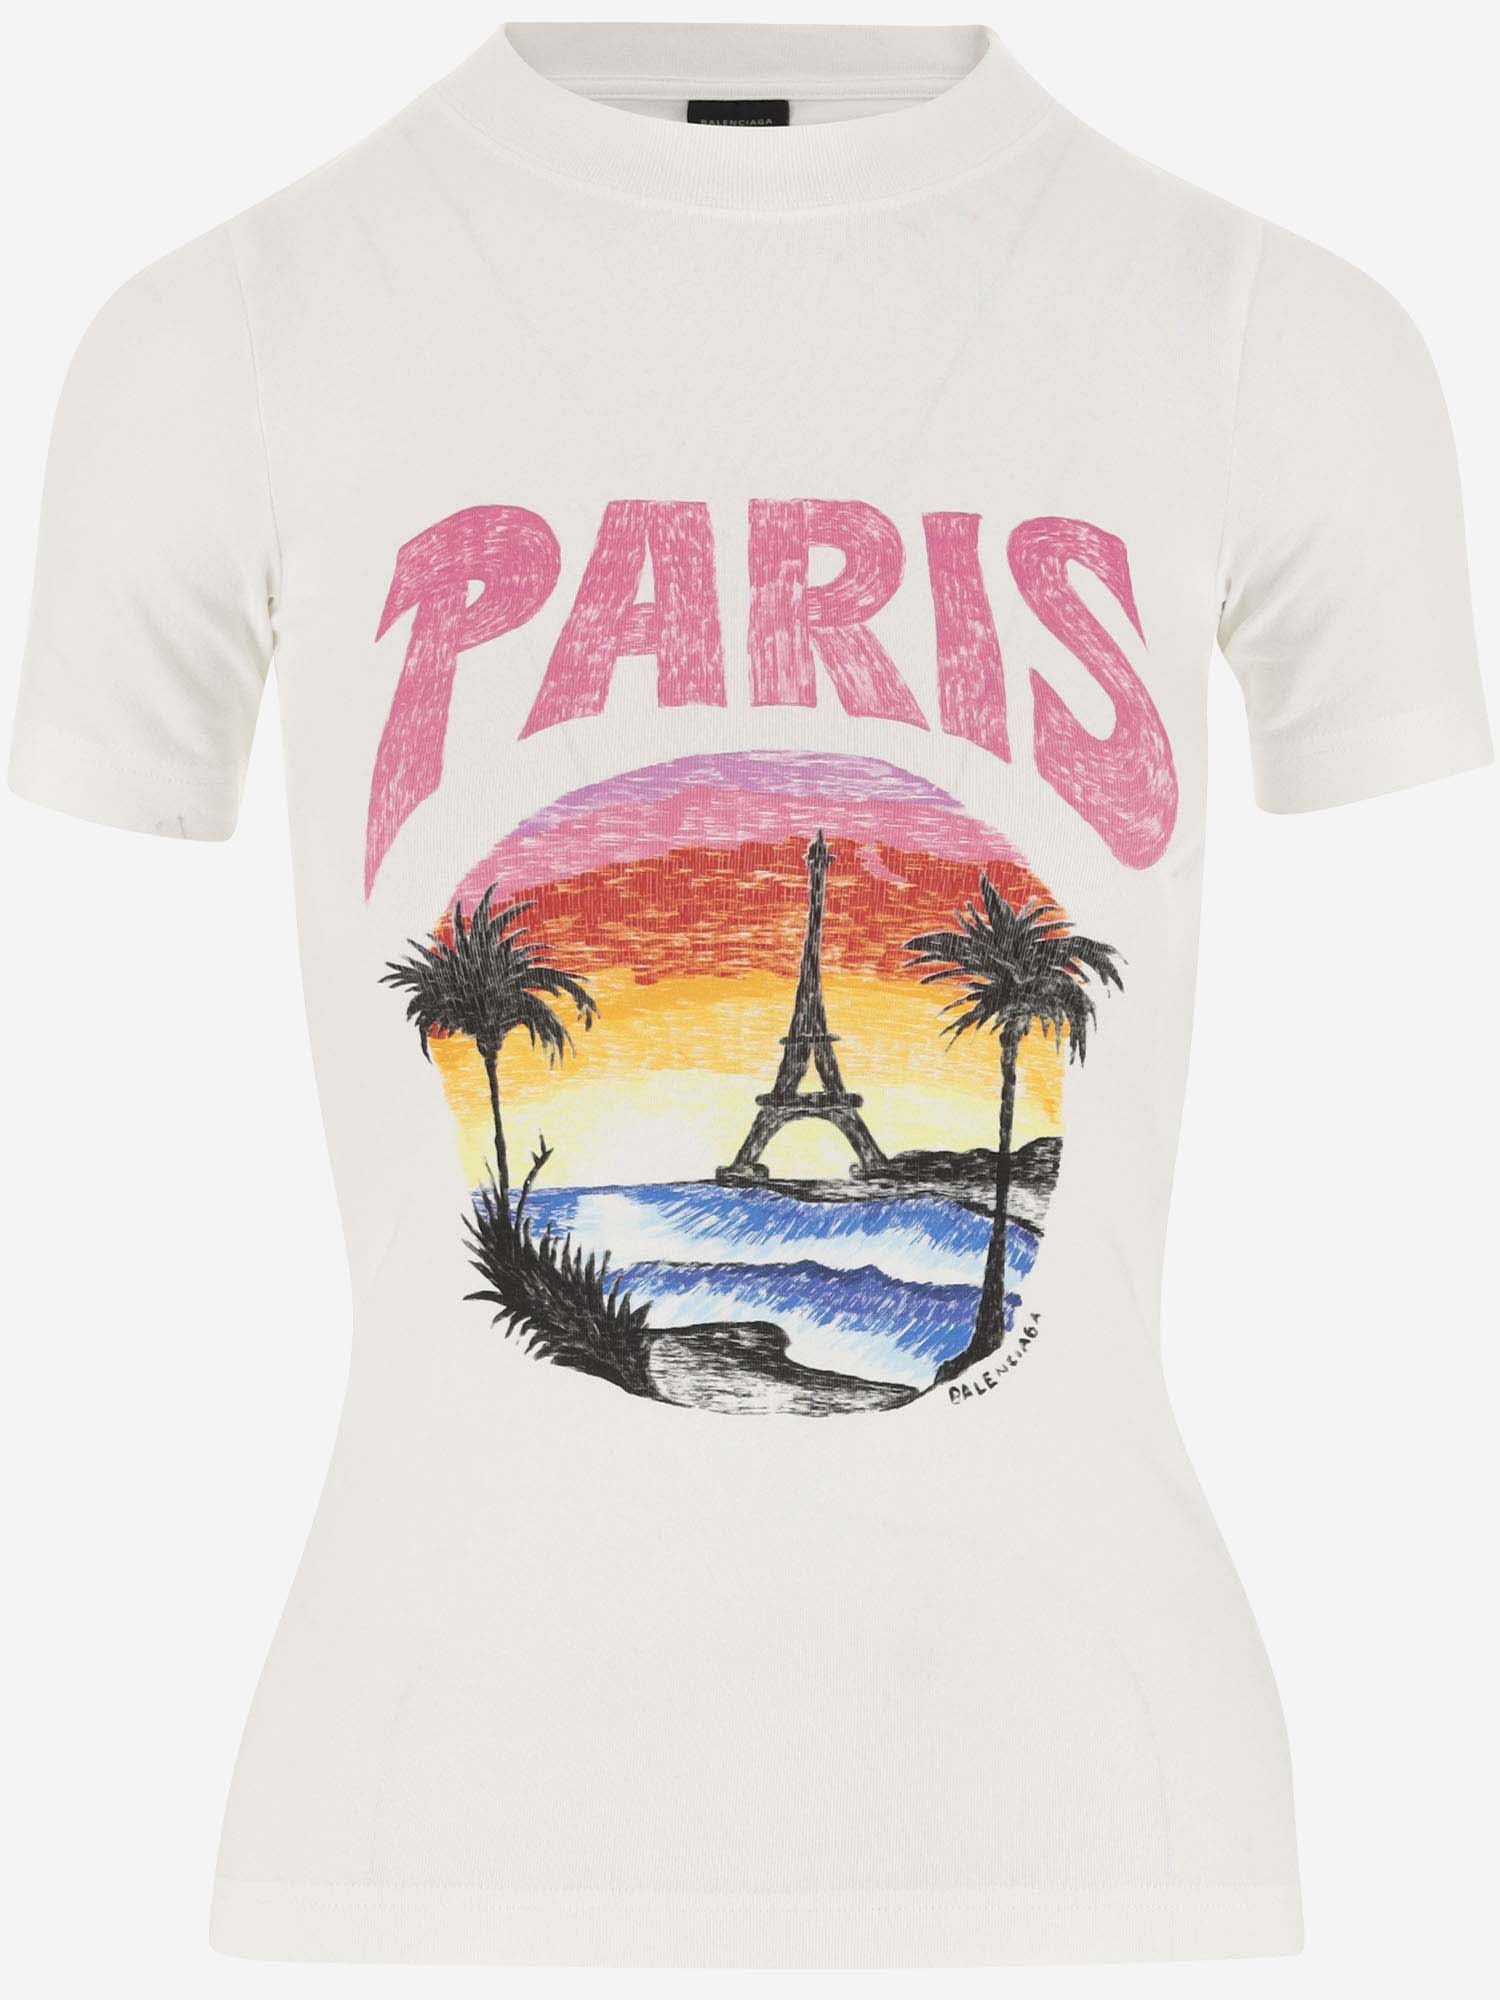 Balenciaga Stretch Cotton T-shirt With Graphic Print In White/pink